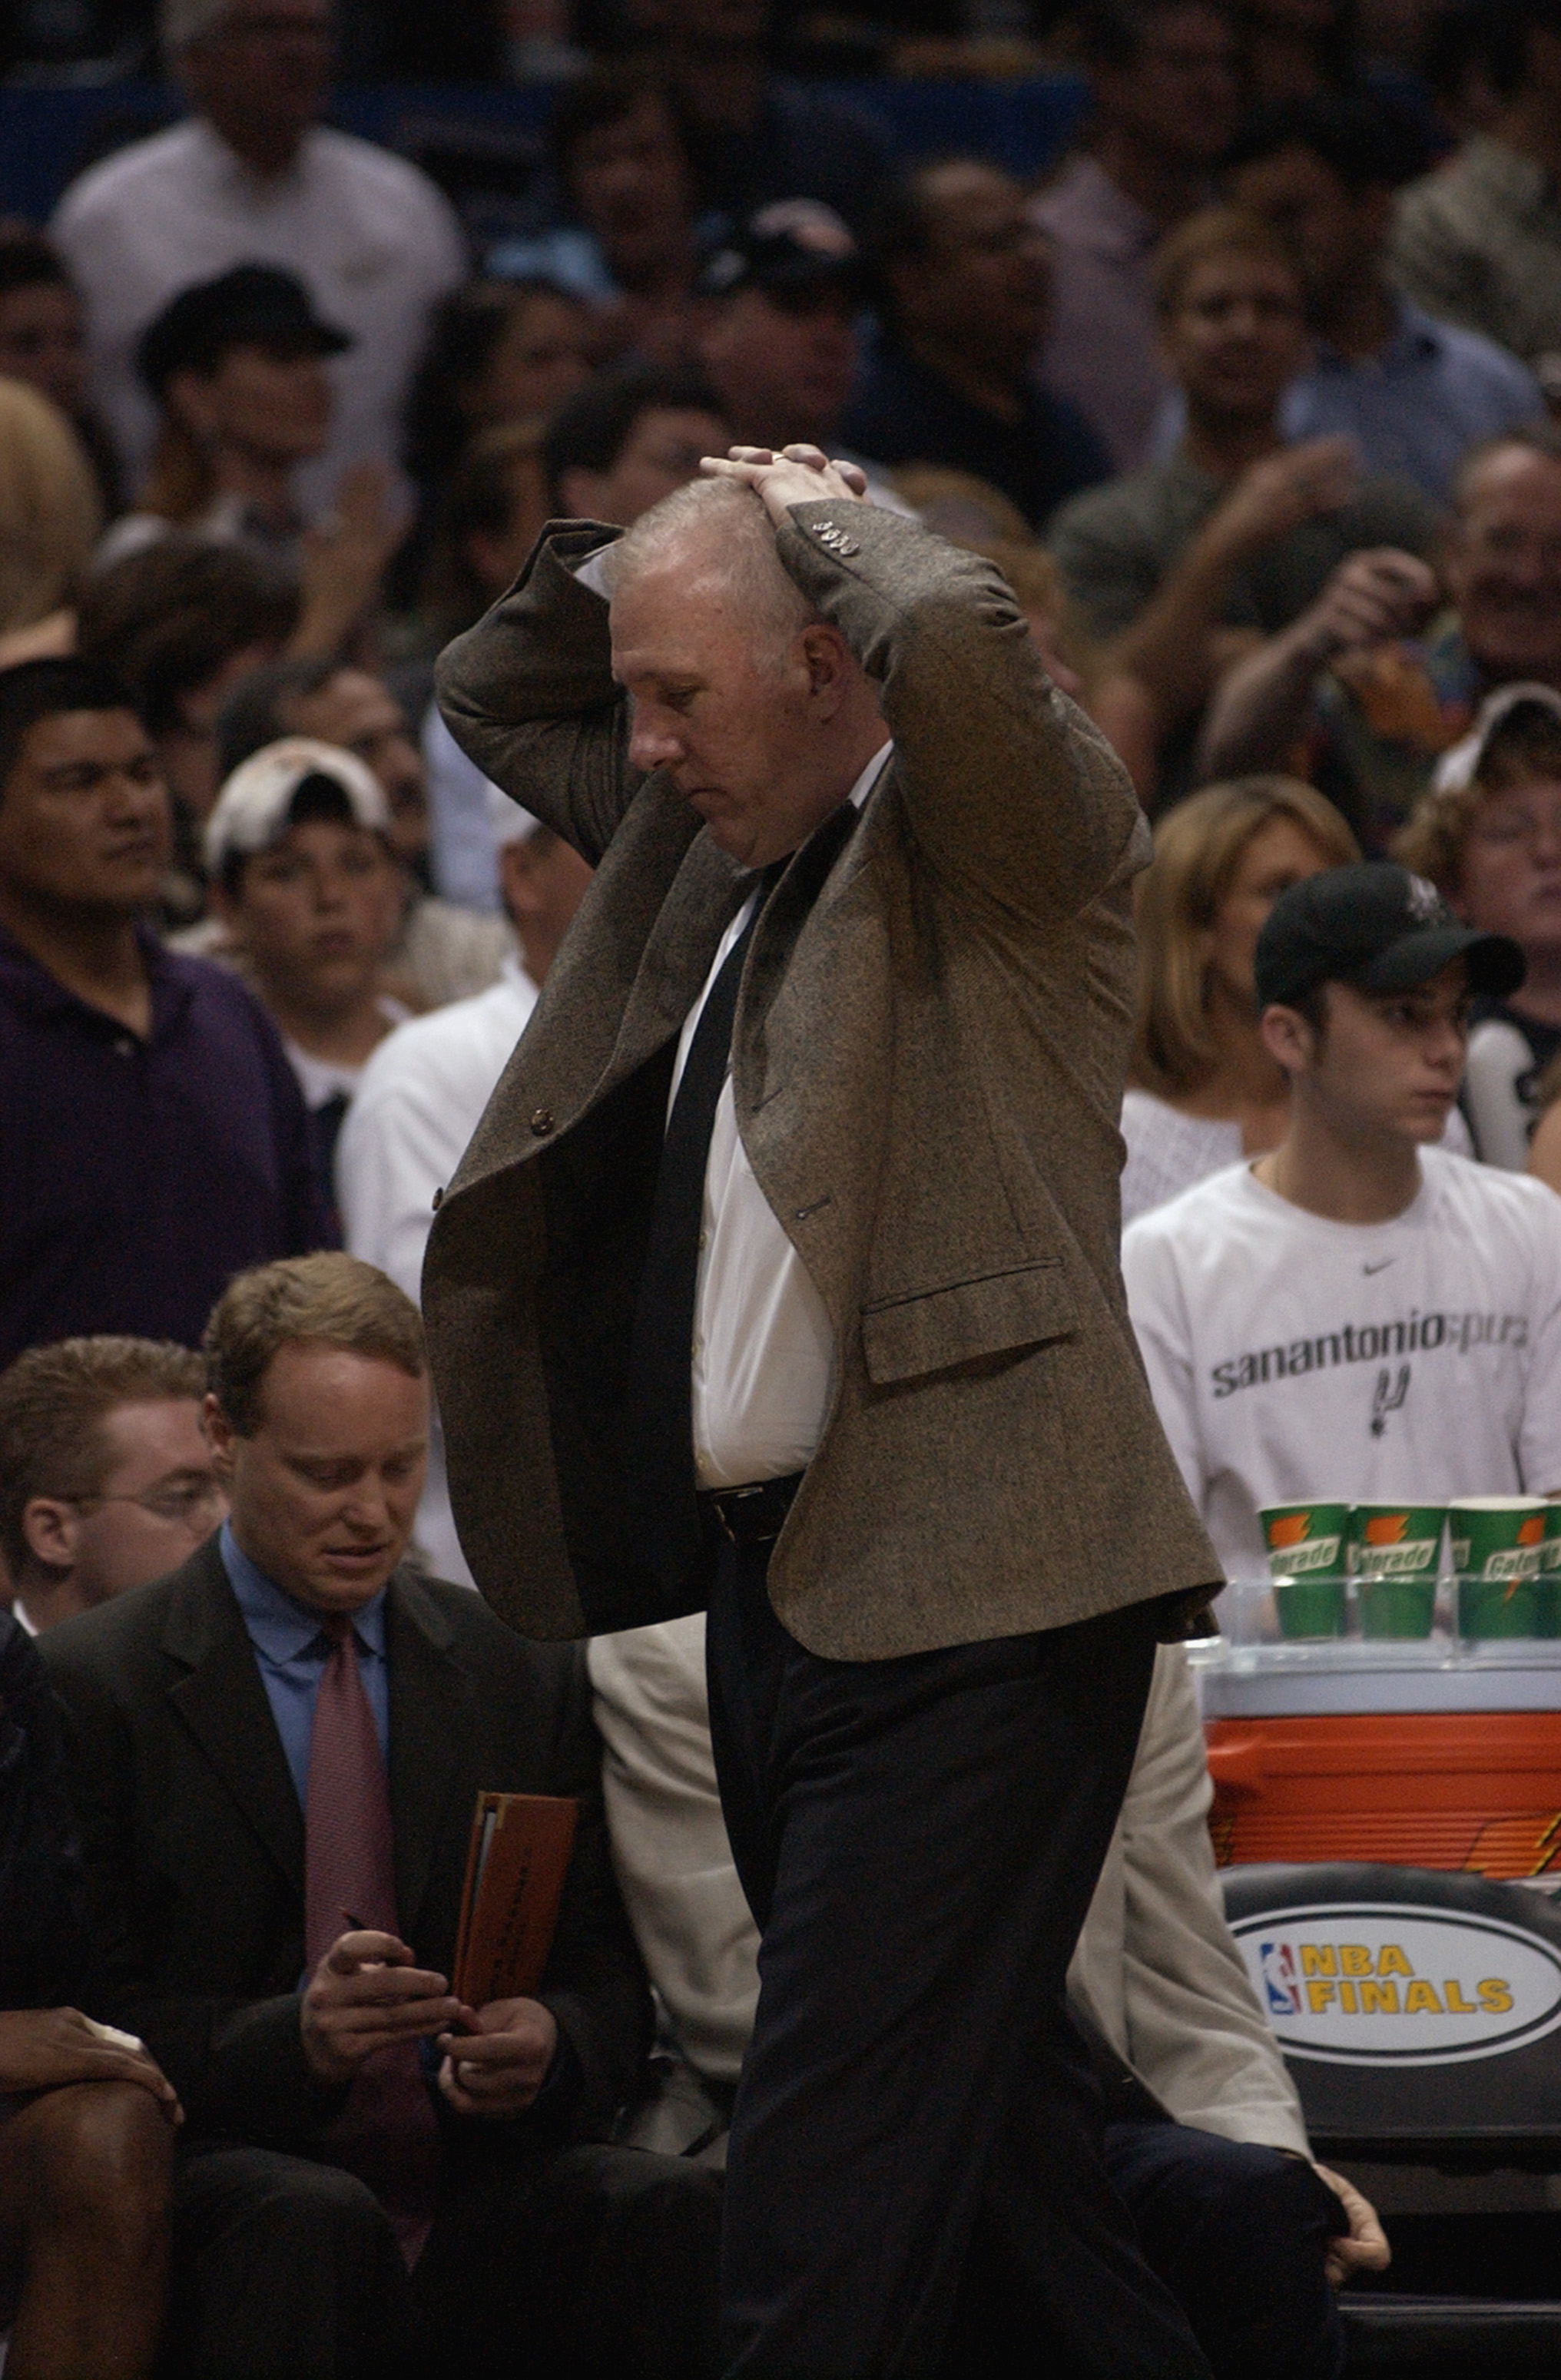 SAN ANTONIO - JUNE 6:  Head coach Gregg Popovich of the San Antonio Spurs paces the sidelines during Game two of the 2003 NBA Finals against the New Jersey Nets at SBC Center on June 6, 2003 in San Antonio, Texas.  The Nets won 87-85.  NOTE TO USER: User